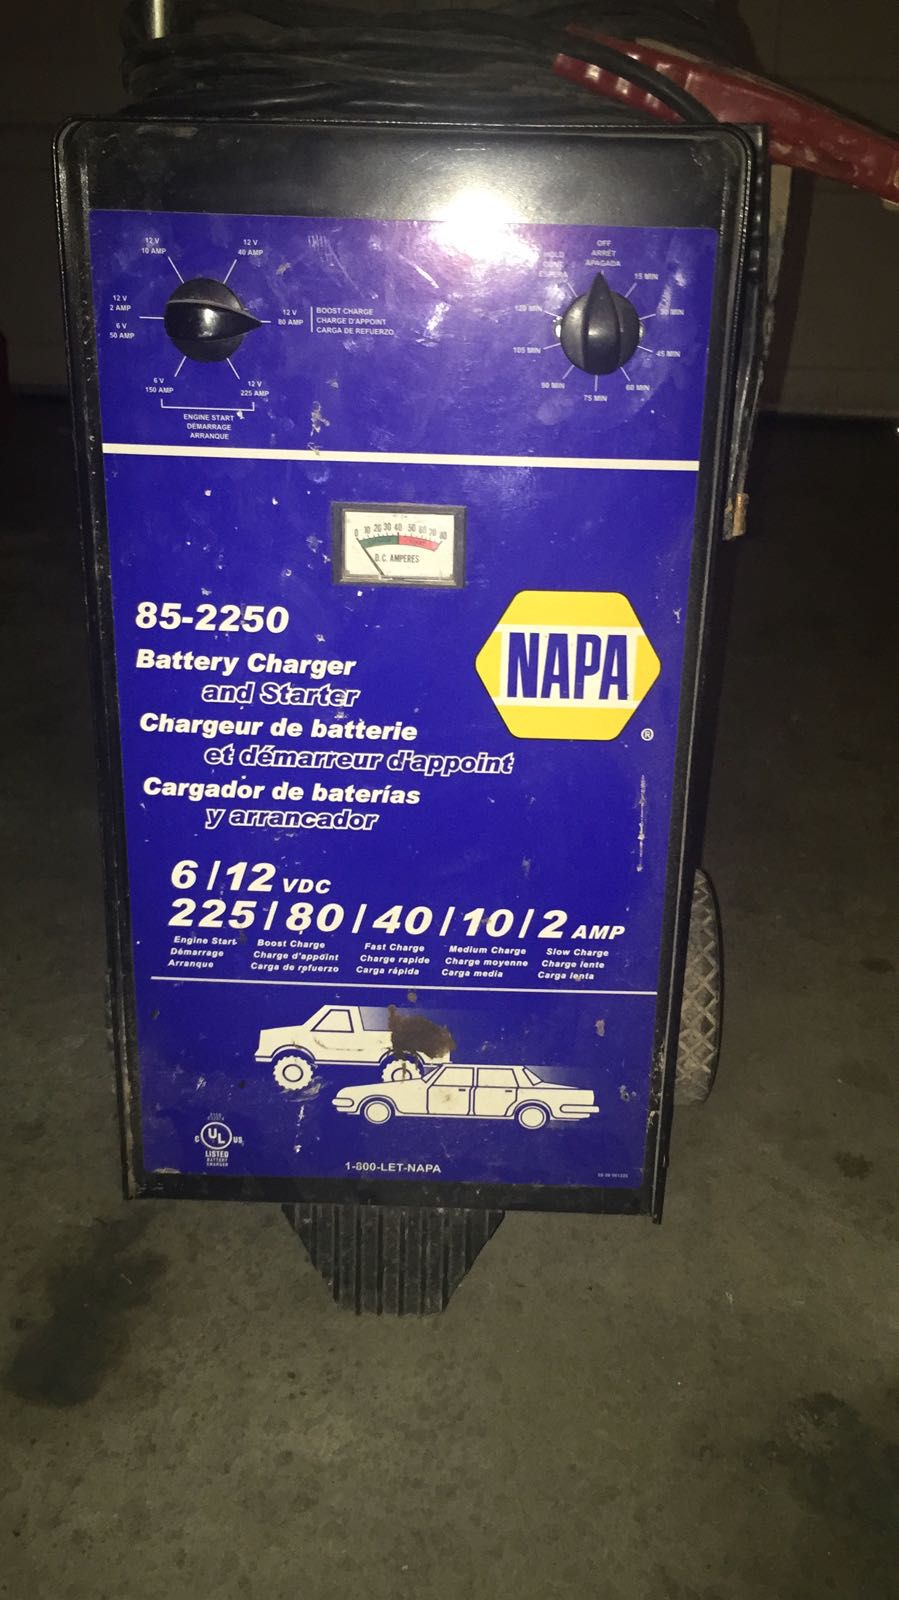 NAPA battery charger & starter